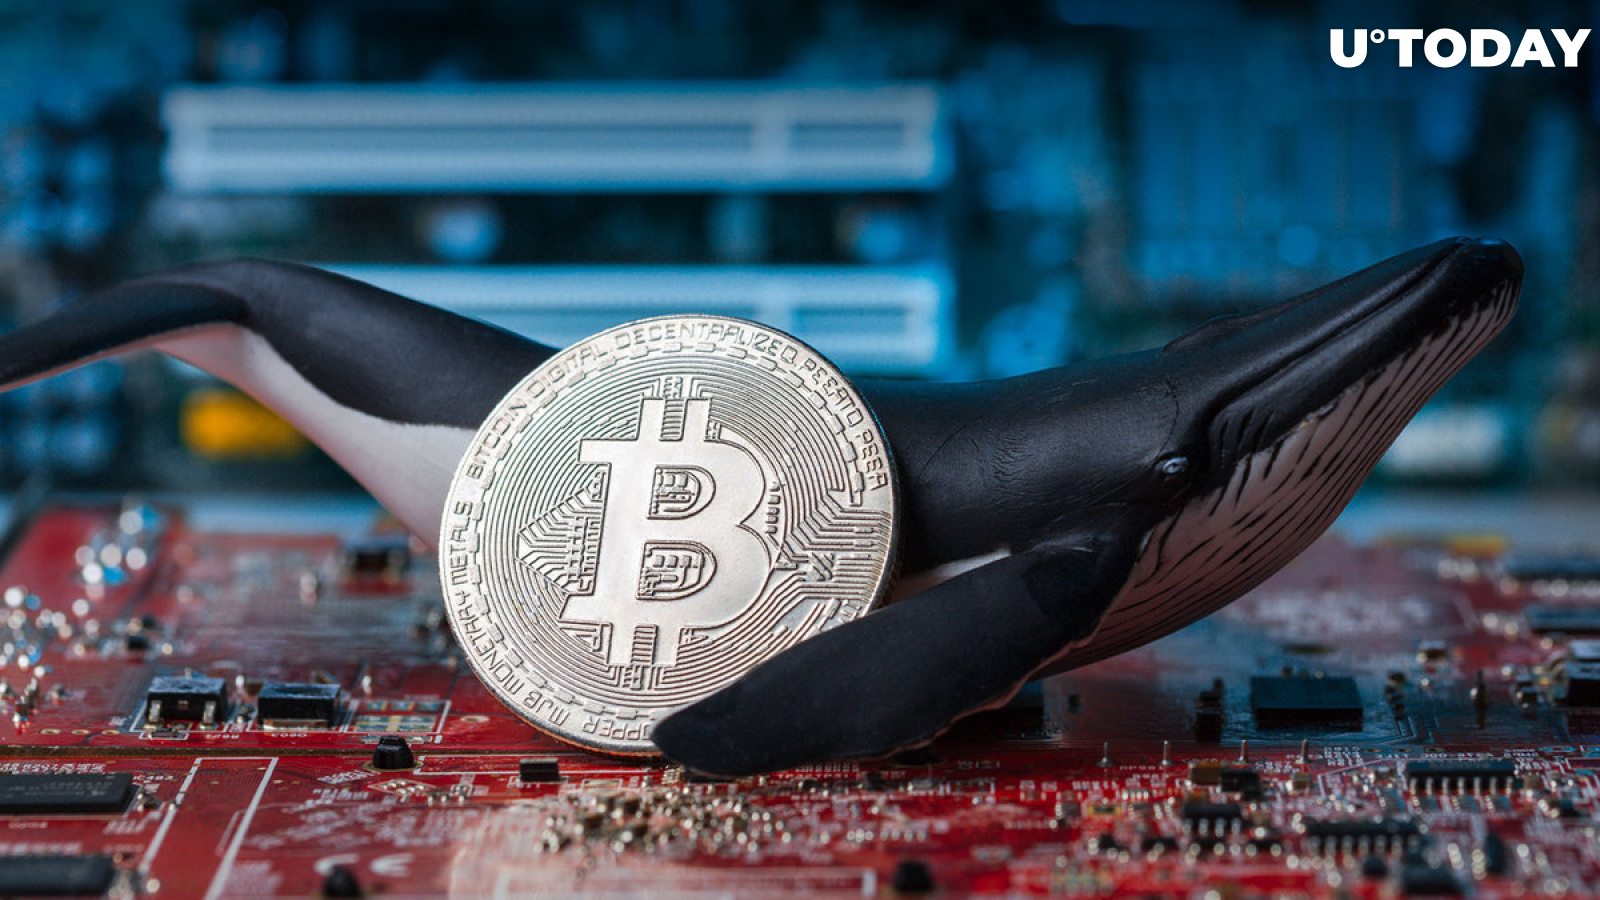 Bitcoin (BTC) Whales Should Only Be Tracked on These Exchanges, CryptoQuant CEO Says